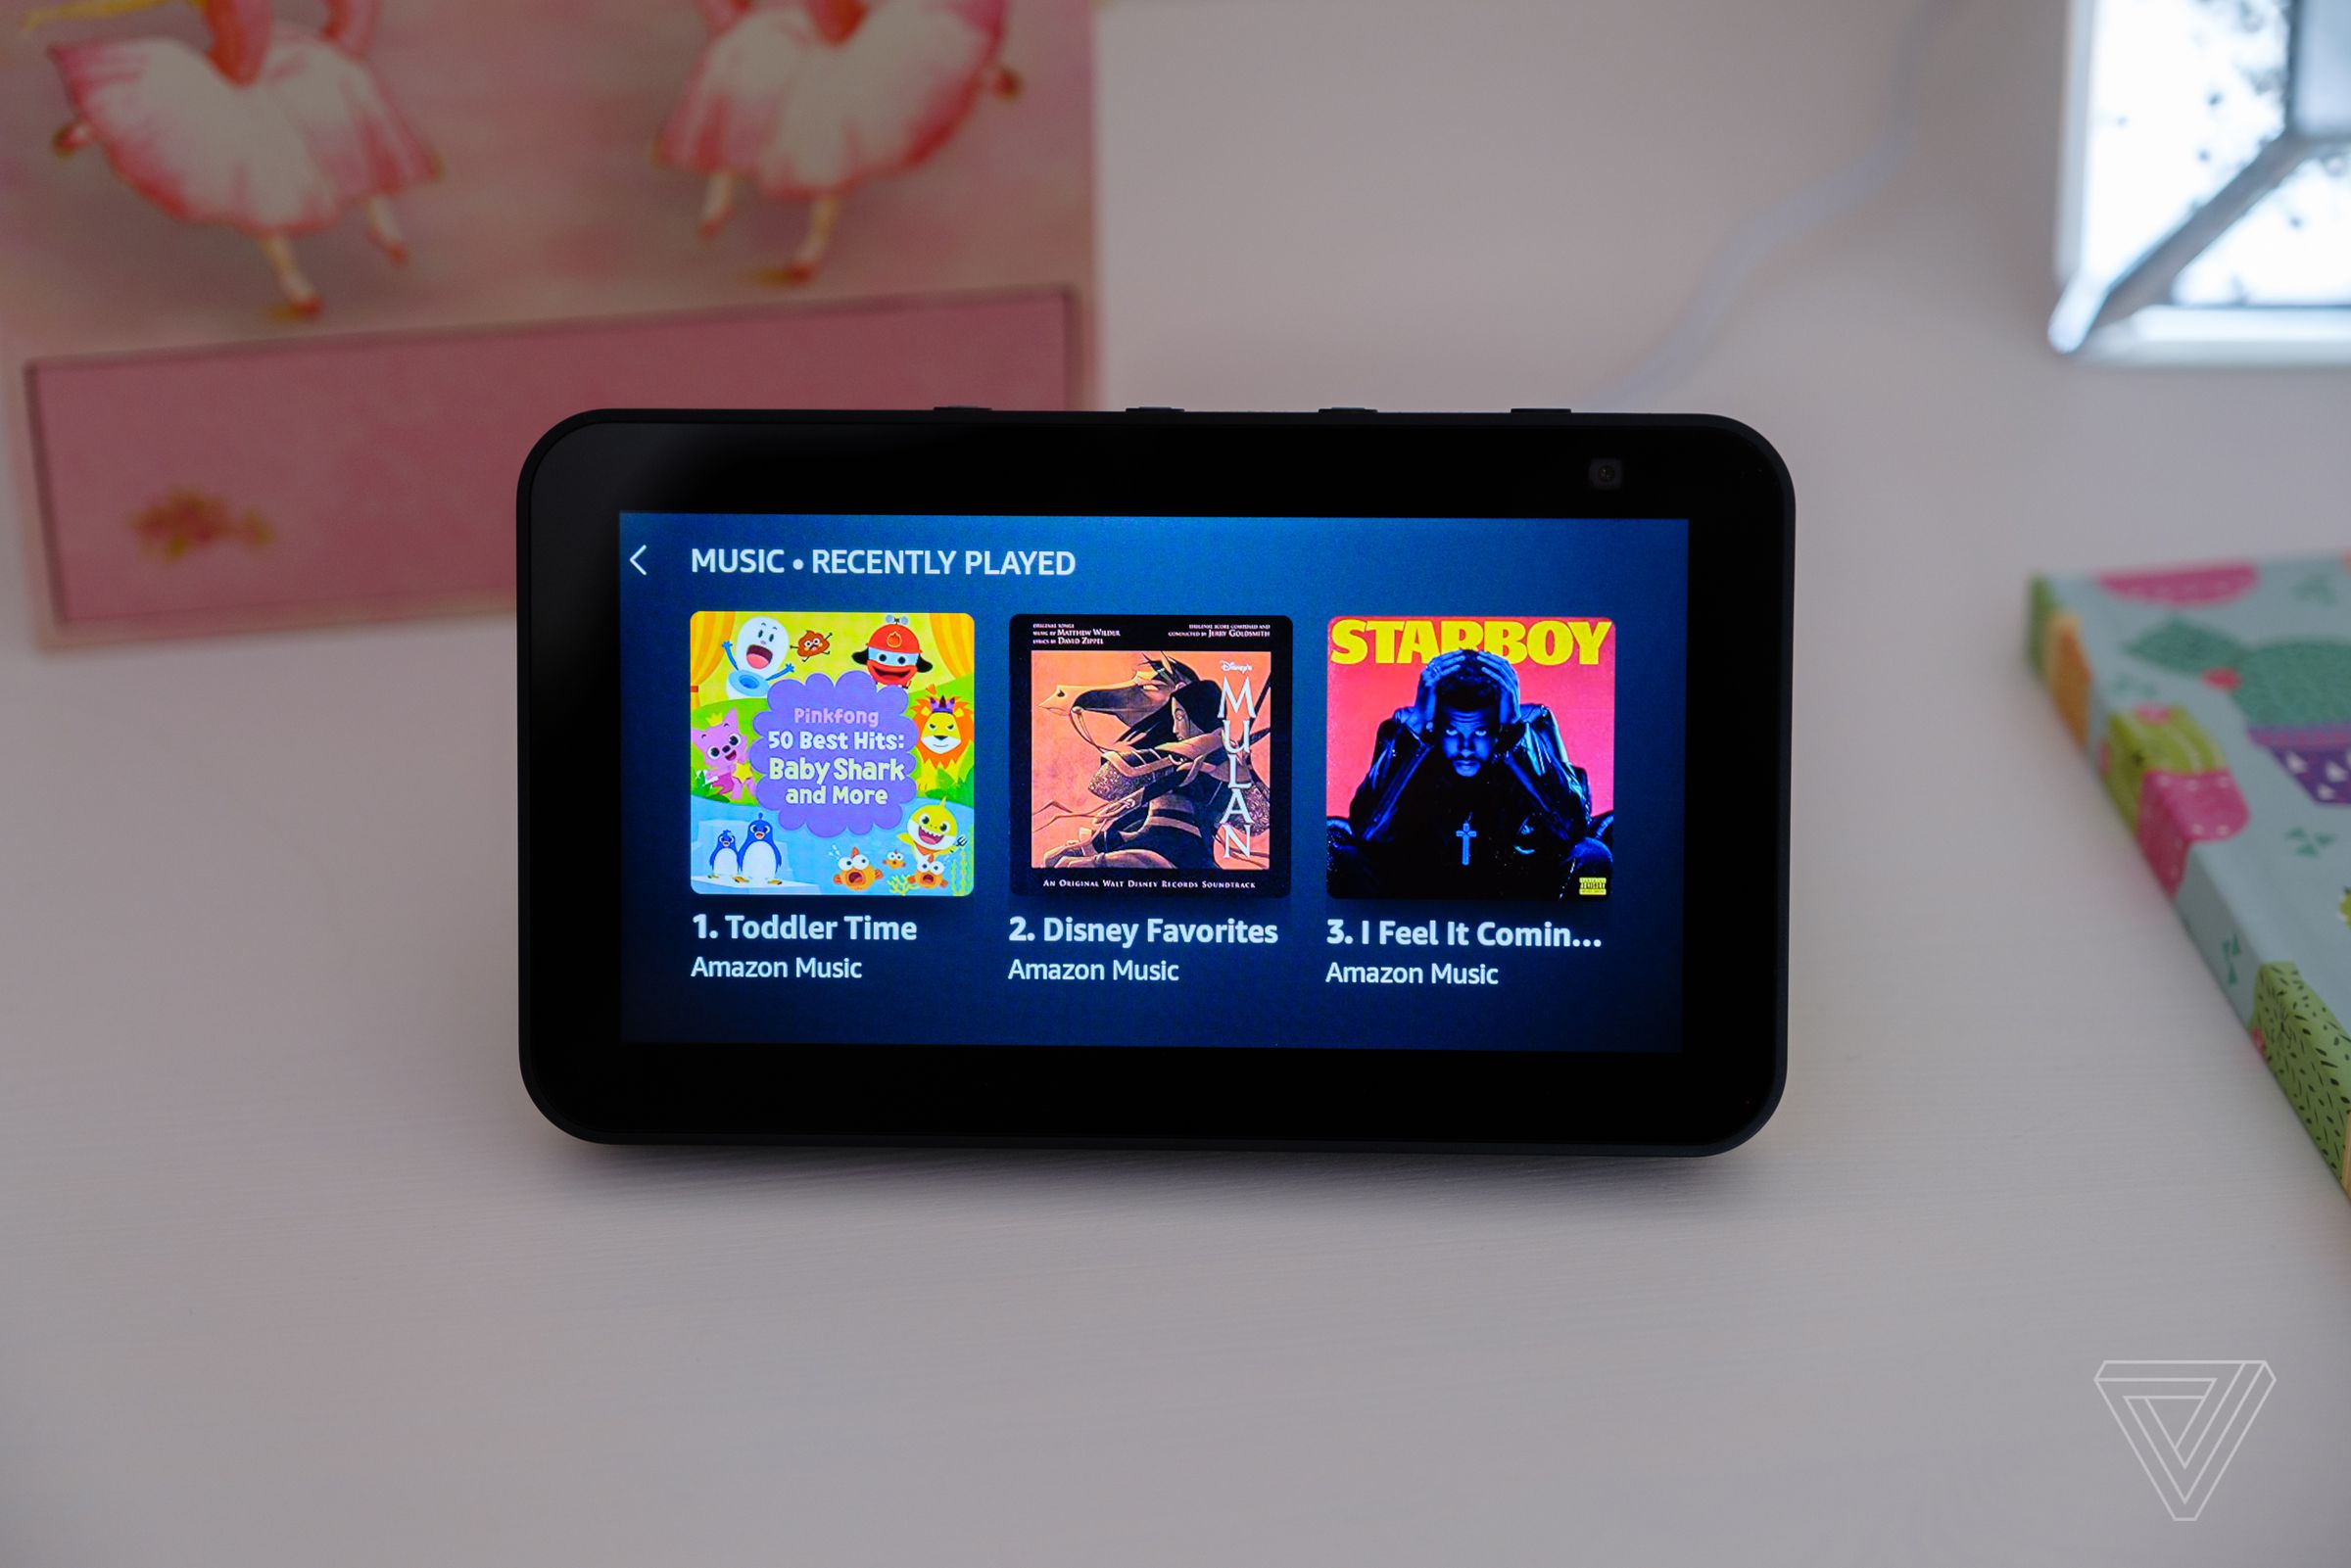 The Kids Plus service that comes with the Kids Edition limits what can be played on the device.